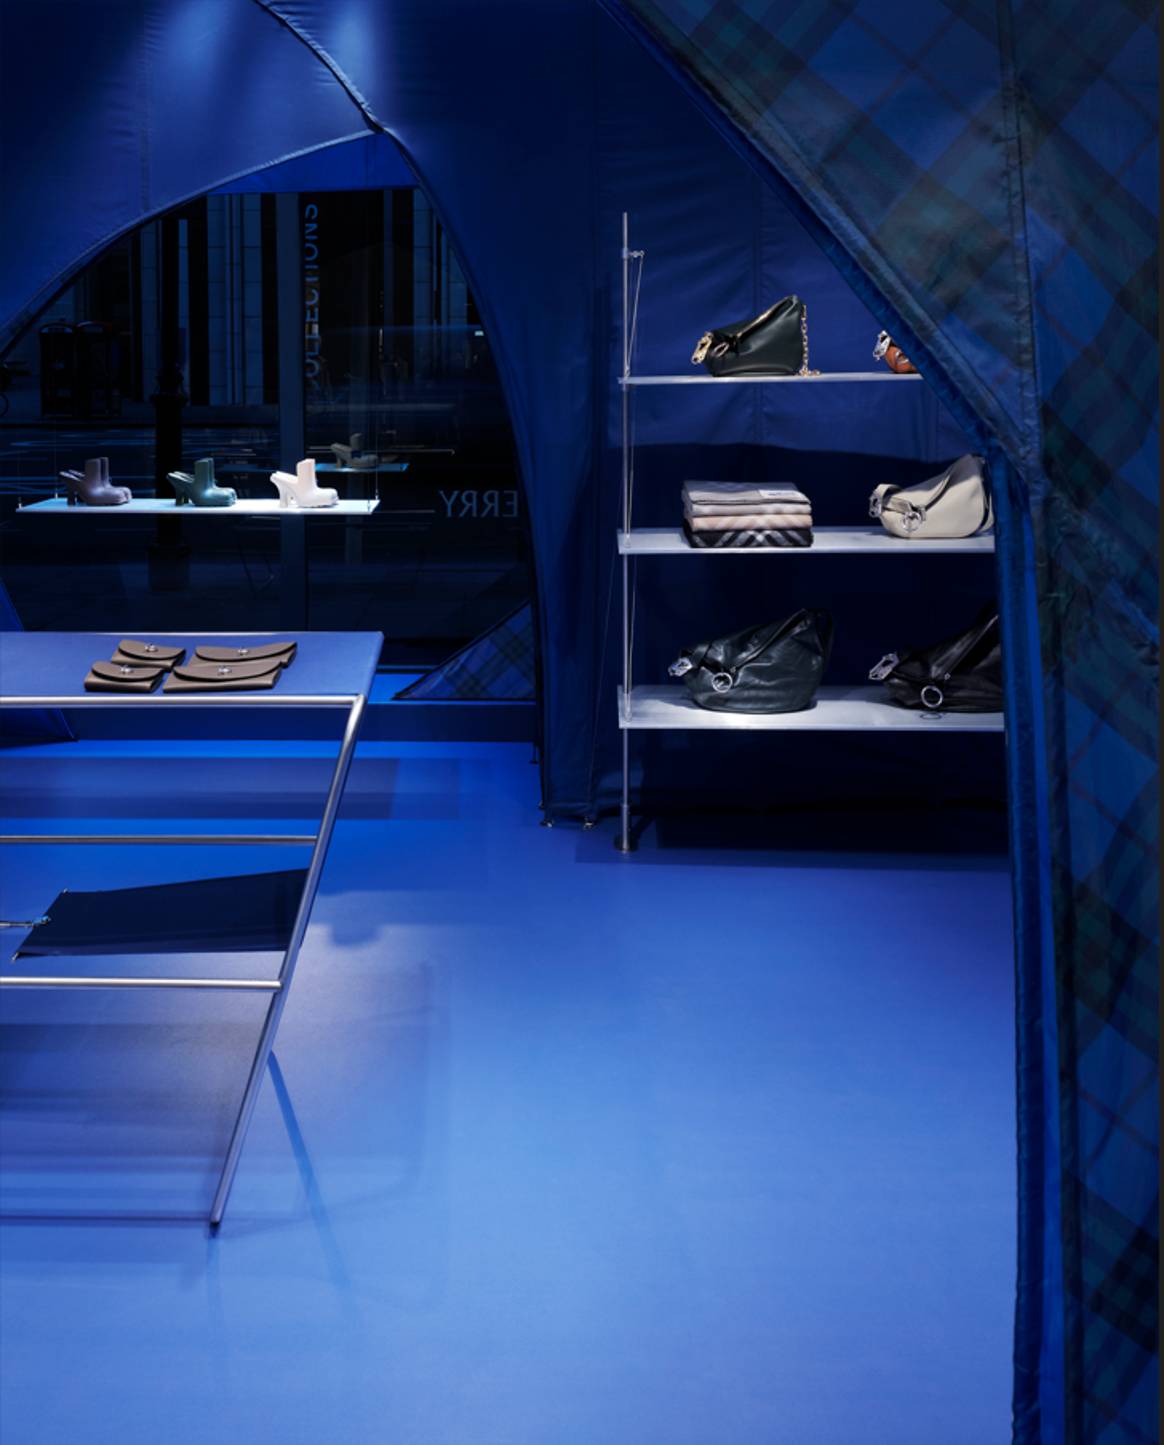 Burberry ‘Knight Blue’ takeover at Harrods